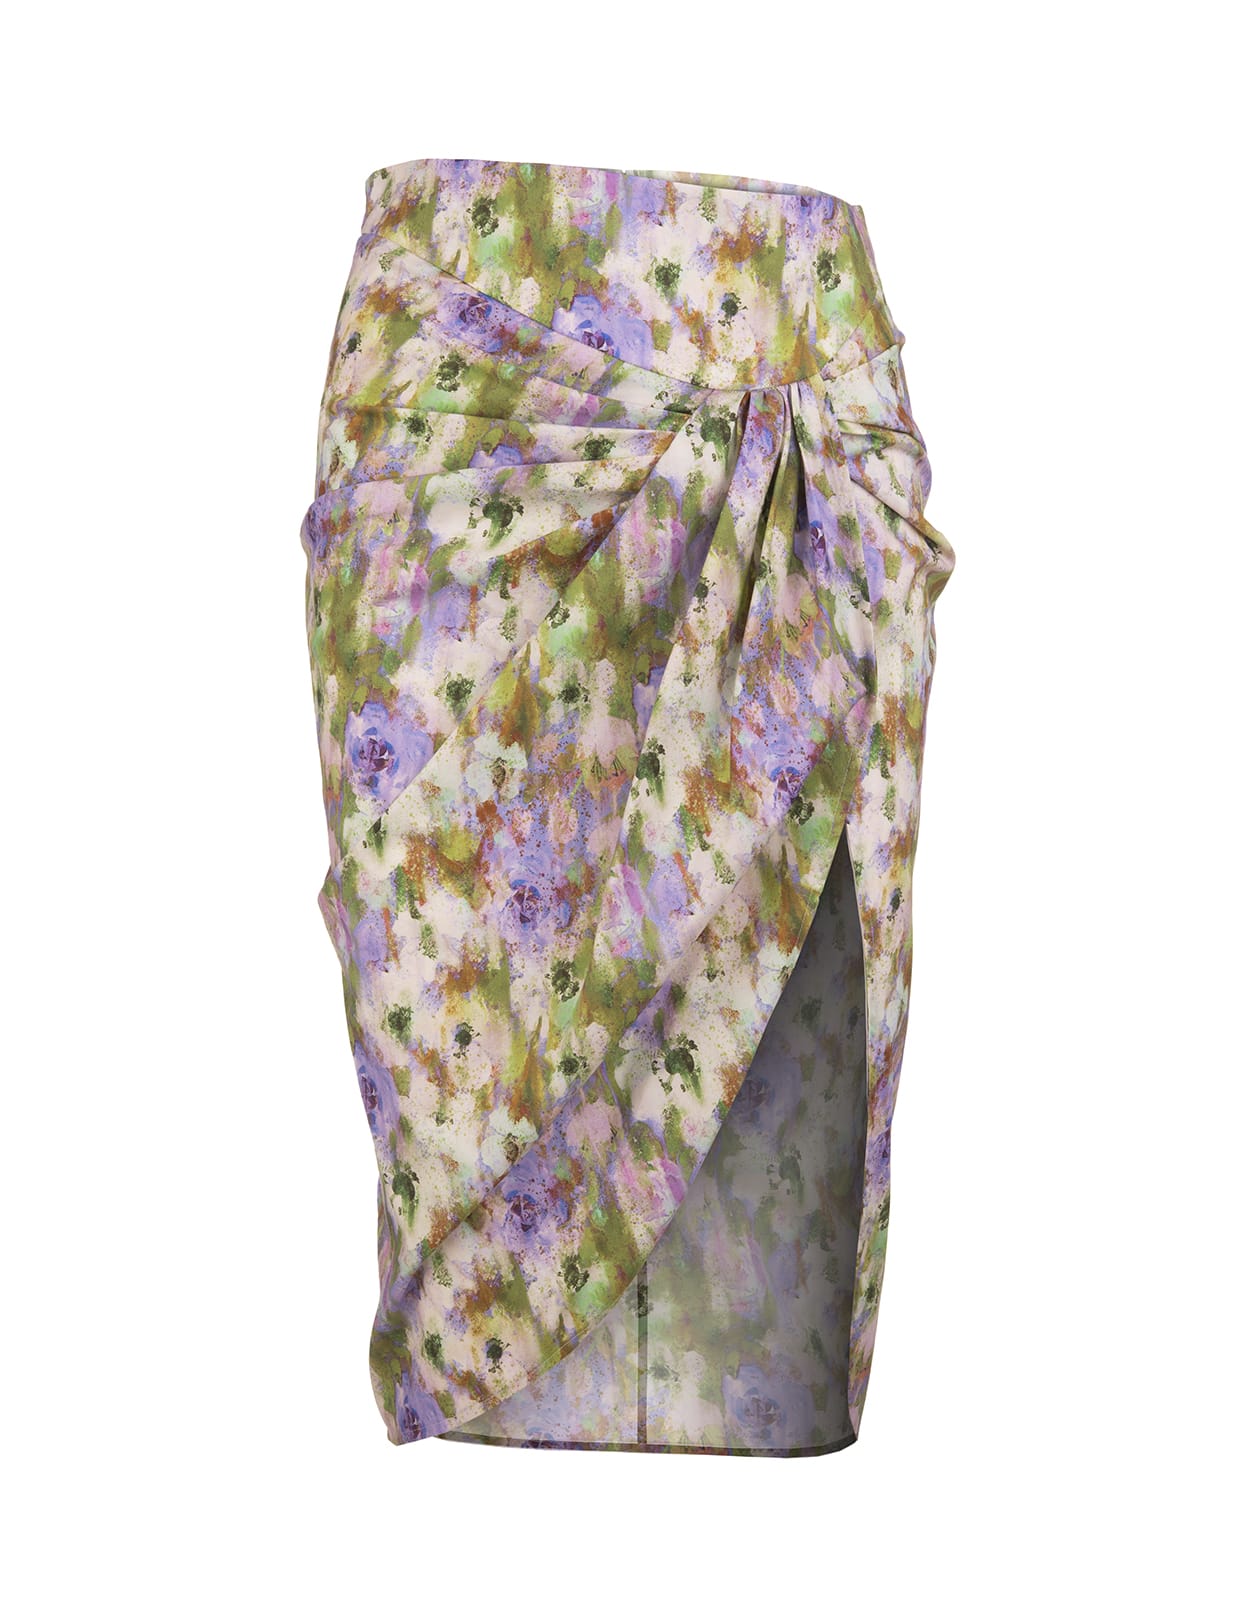 Giuseppe di Morabito Midi Skirt With Draping And All-over Lilac And Green Floral Print